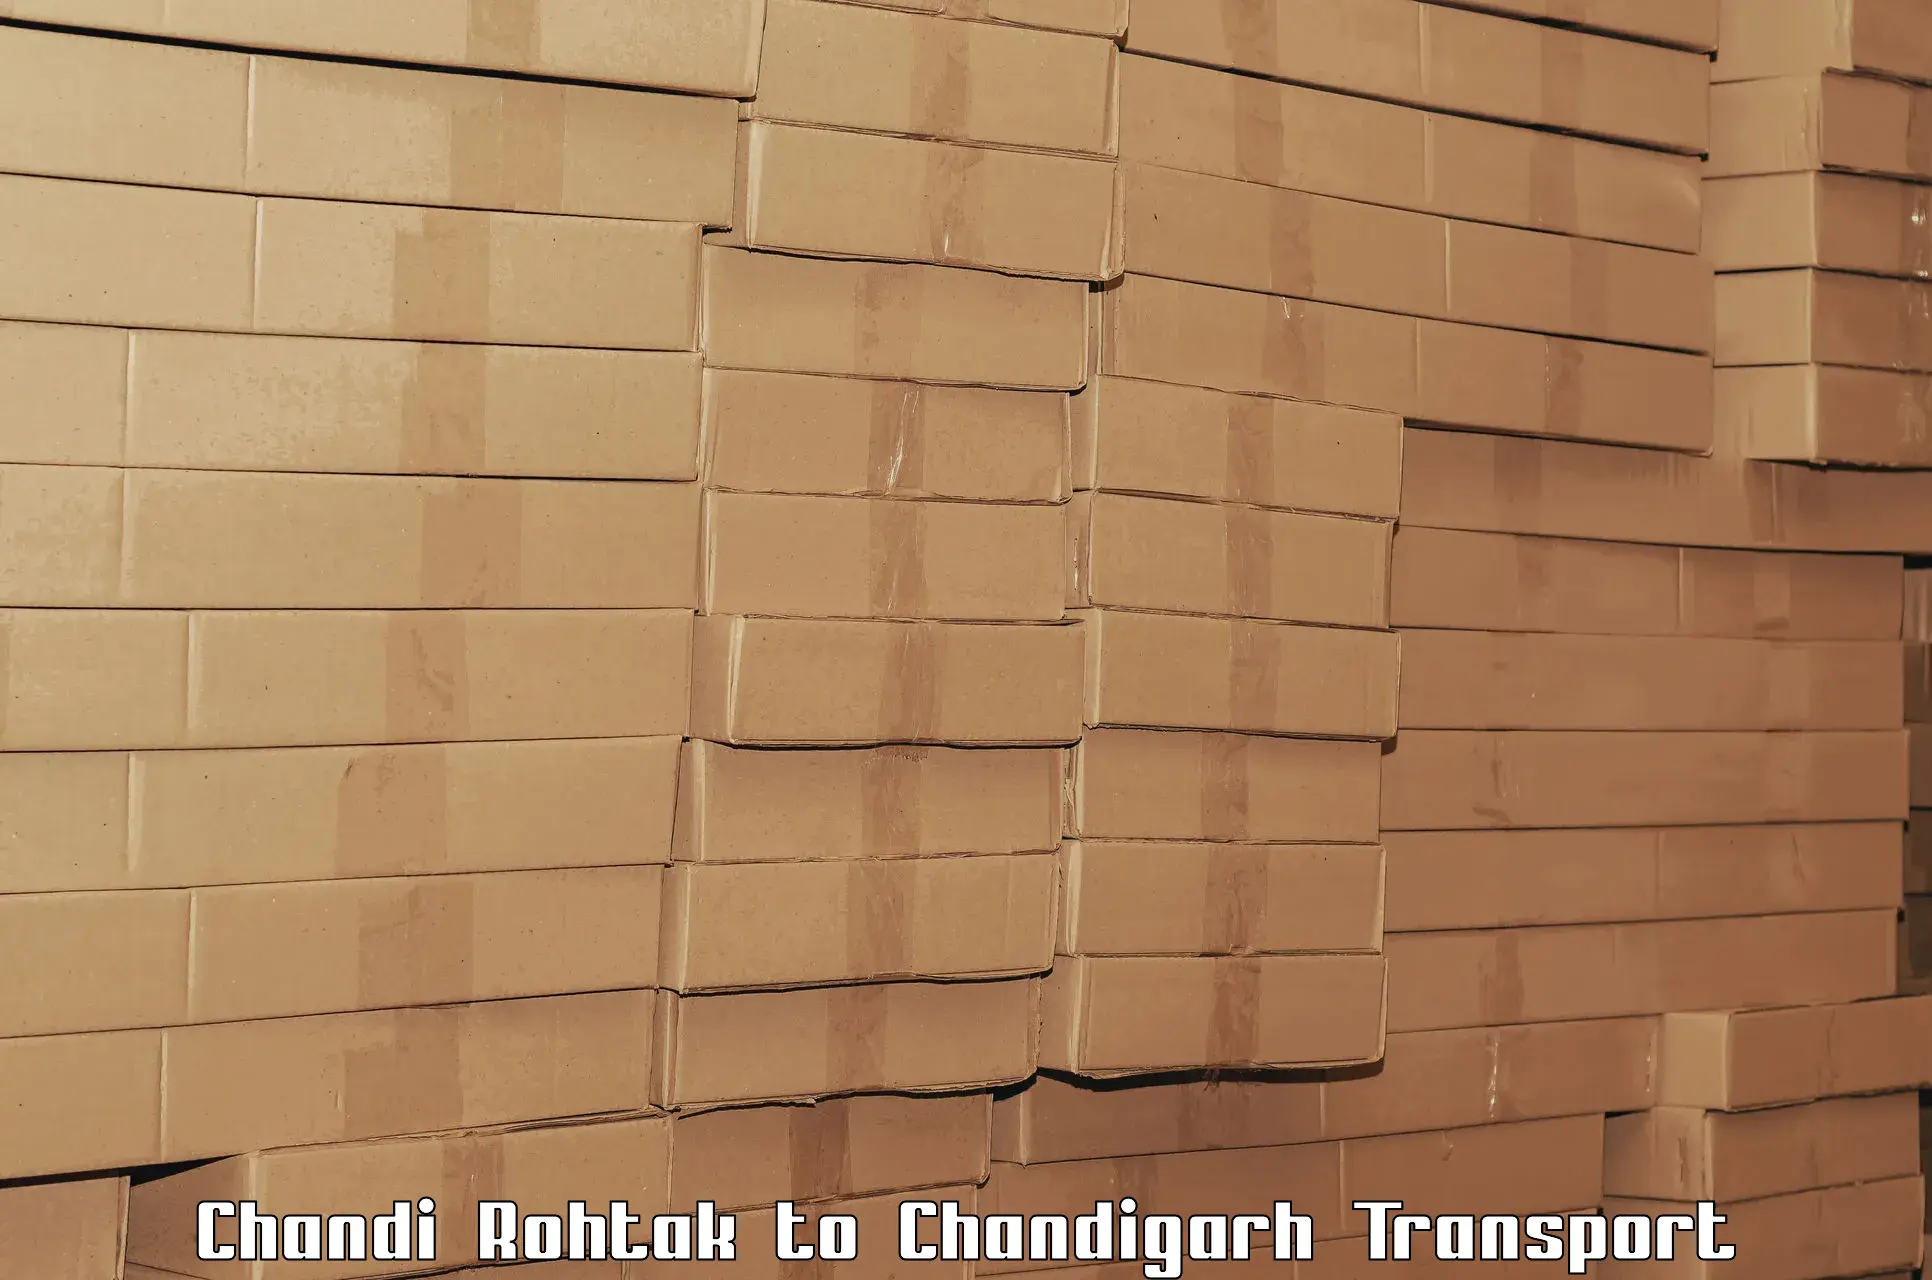 Goods delivery service Chandi Rohtak to Chandigarh